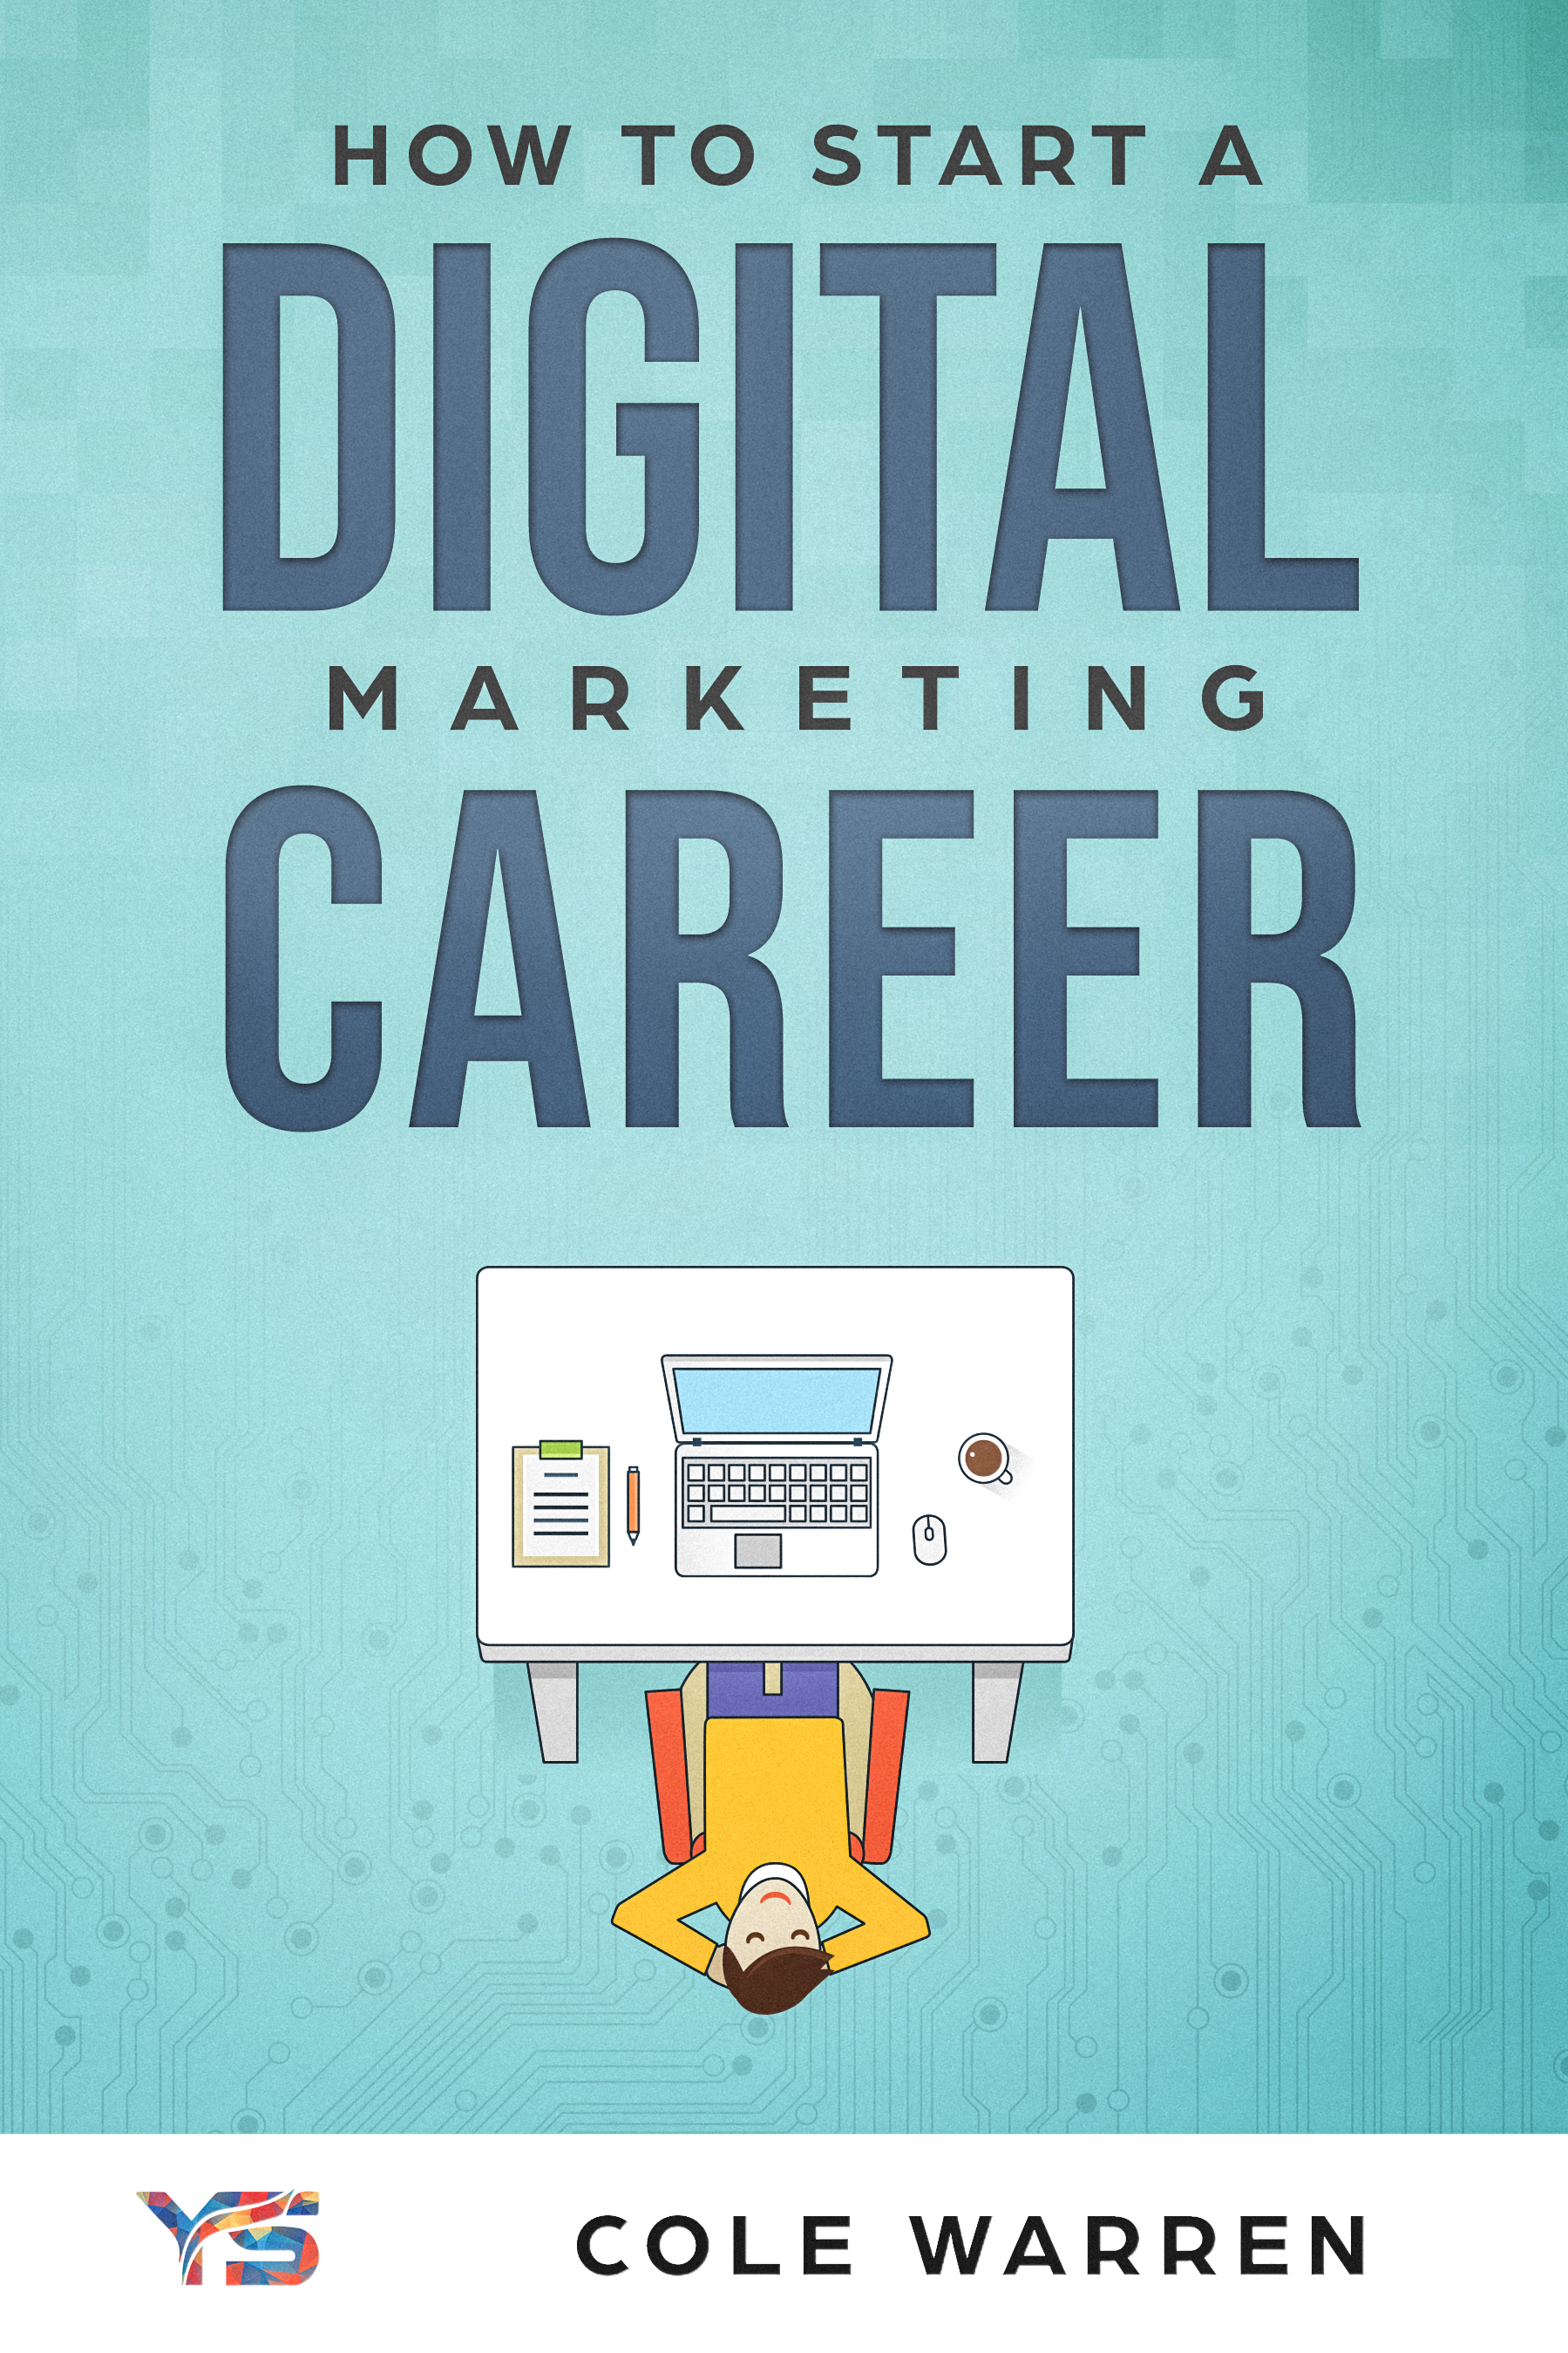 FREE: How to Start a Digital Marketing Career by Cole Warren